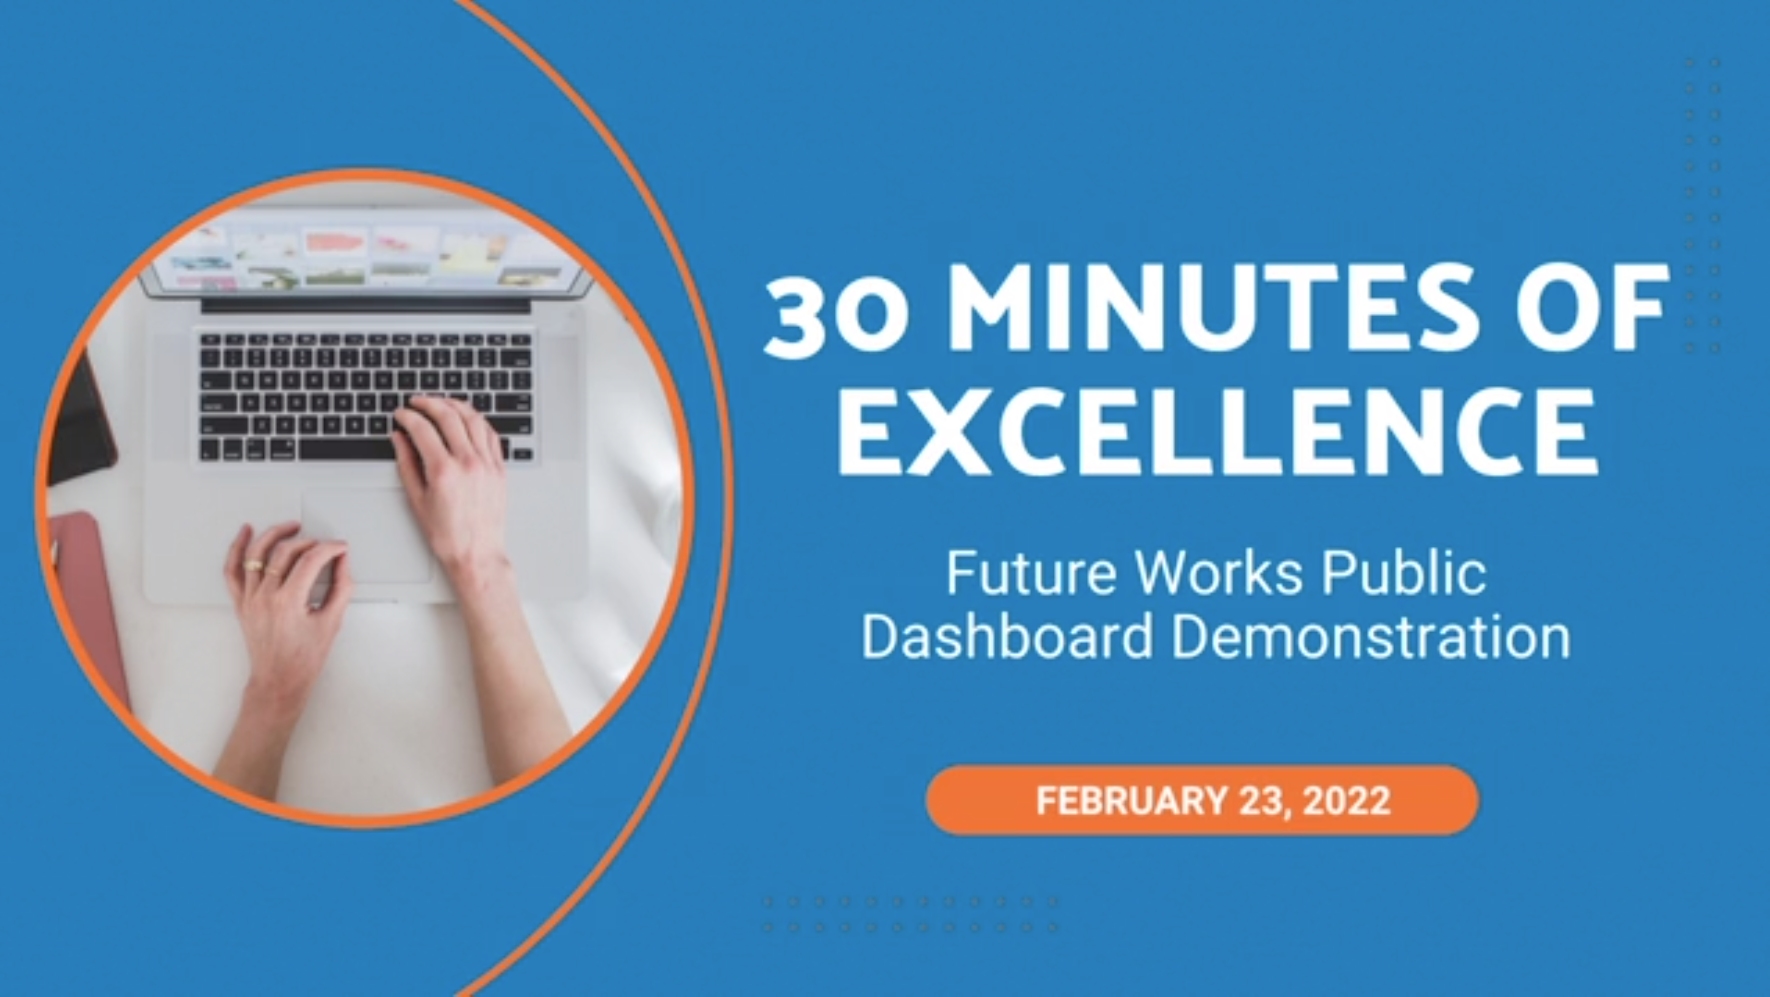 30 Minutes of Excellence, February 23, 2022